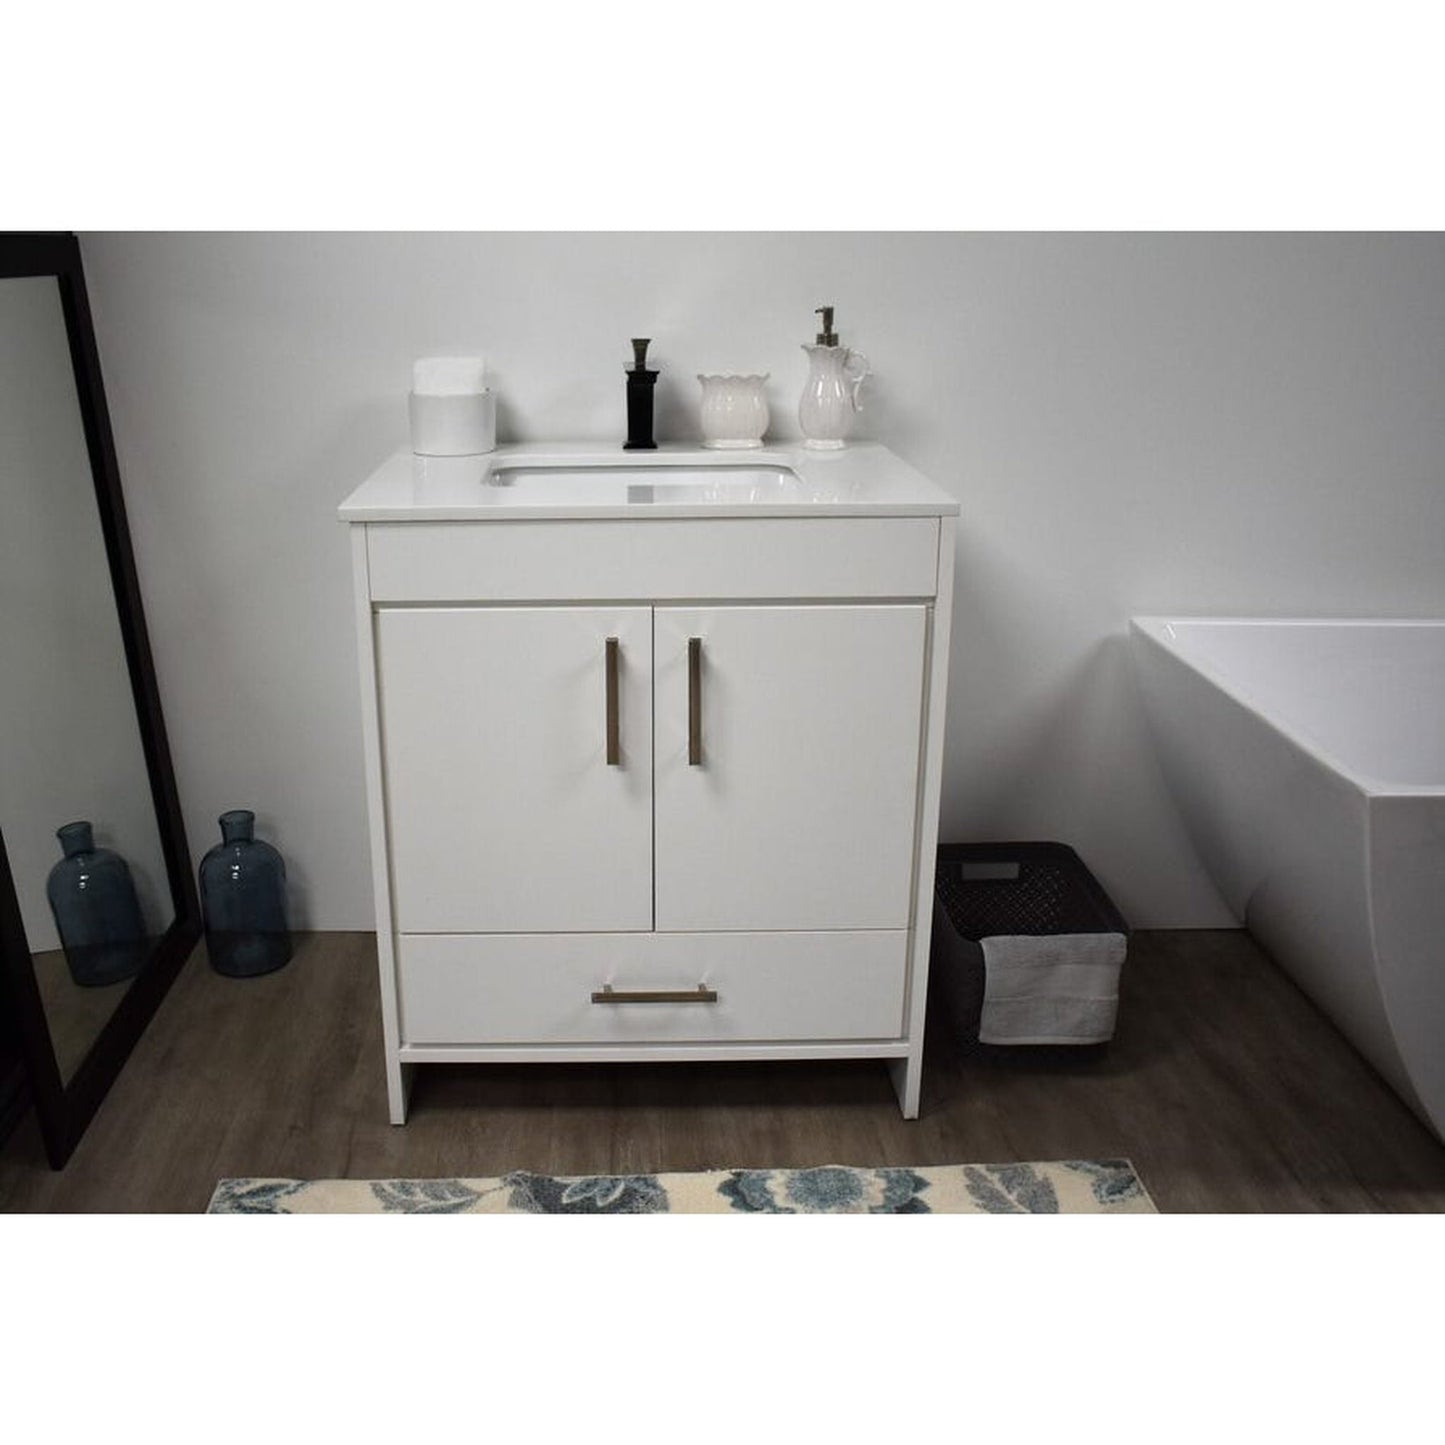 Volpa USA Capri 30" x 22" White Freestanding Modern Bathroom Vanity With Preinstalled Undermount Sink And White Microstone Top With Brushed Nickel Edge Handles